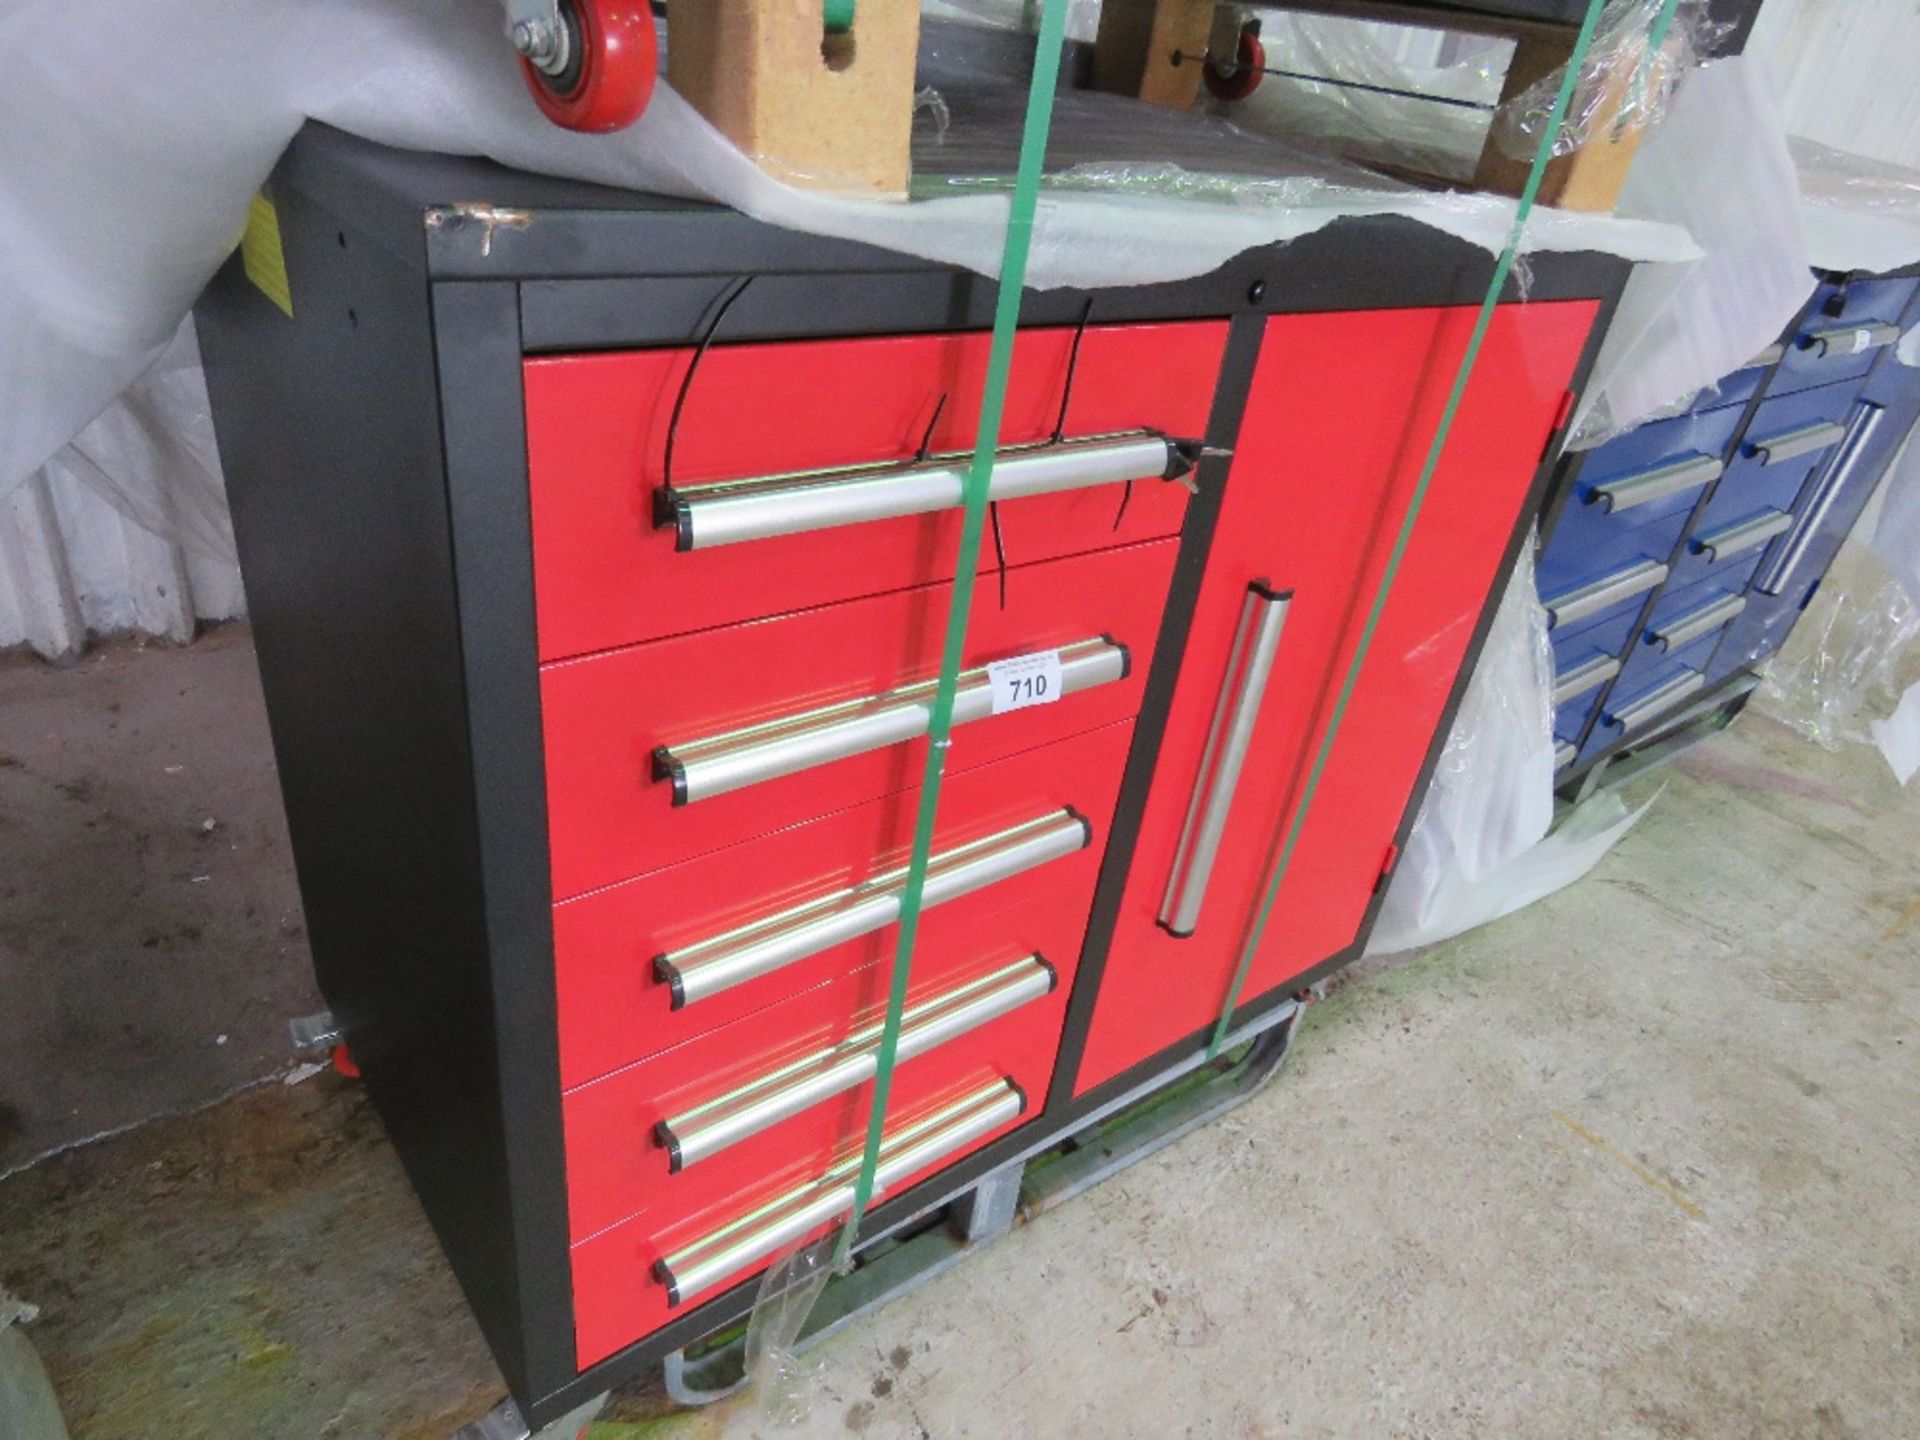 RED COLOURED WORKSHOP TOOL CABINET WITH WHEELS 1.12M WIDE X 0.65M DEPTH APPROX. - Image 2 of 3